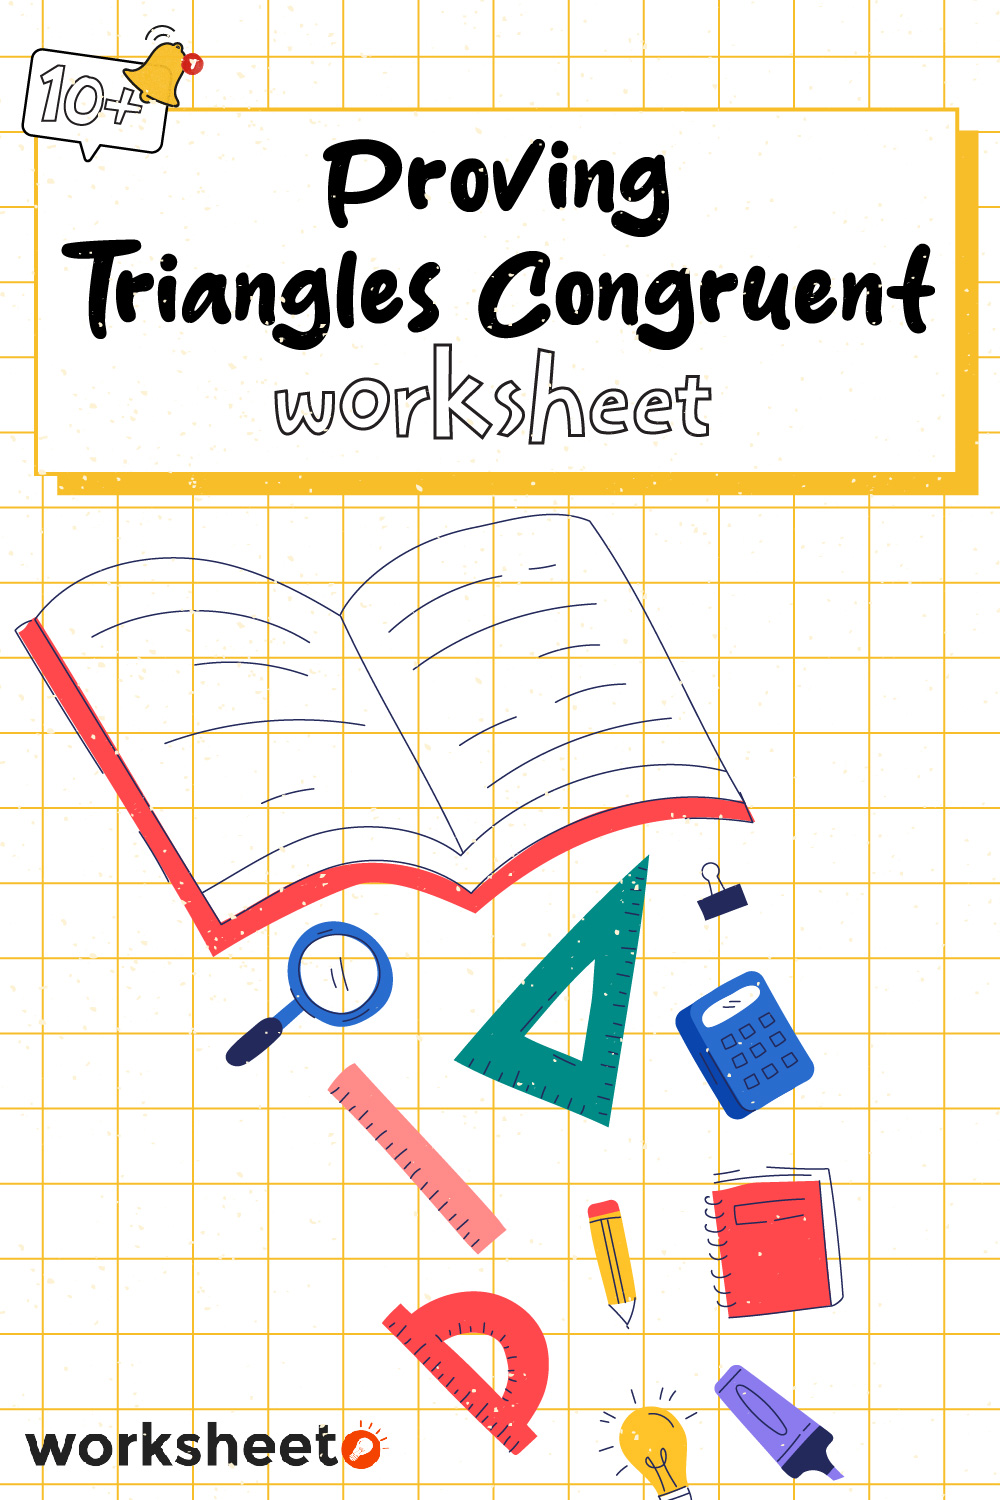 14 Images of Proving Triangles Congruent Worksheet